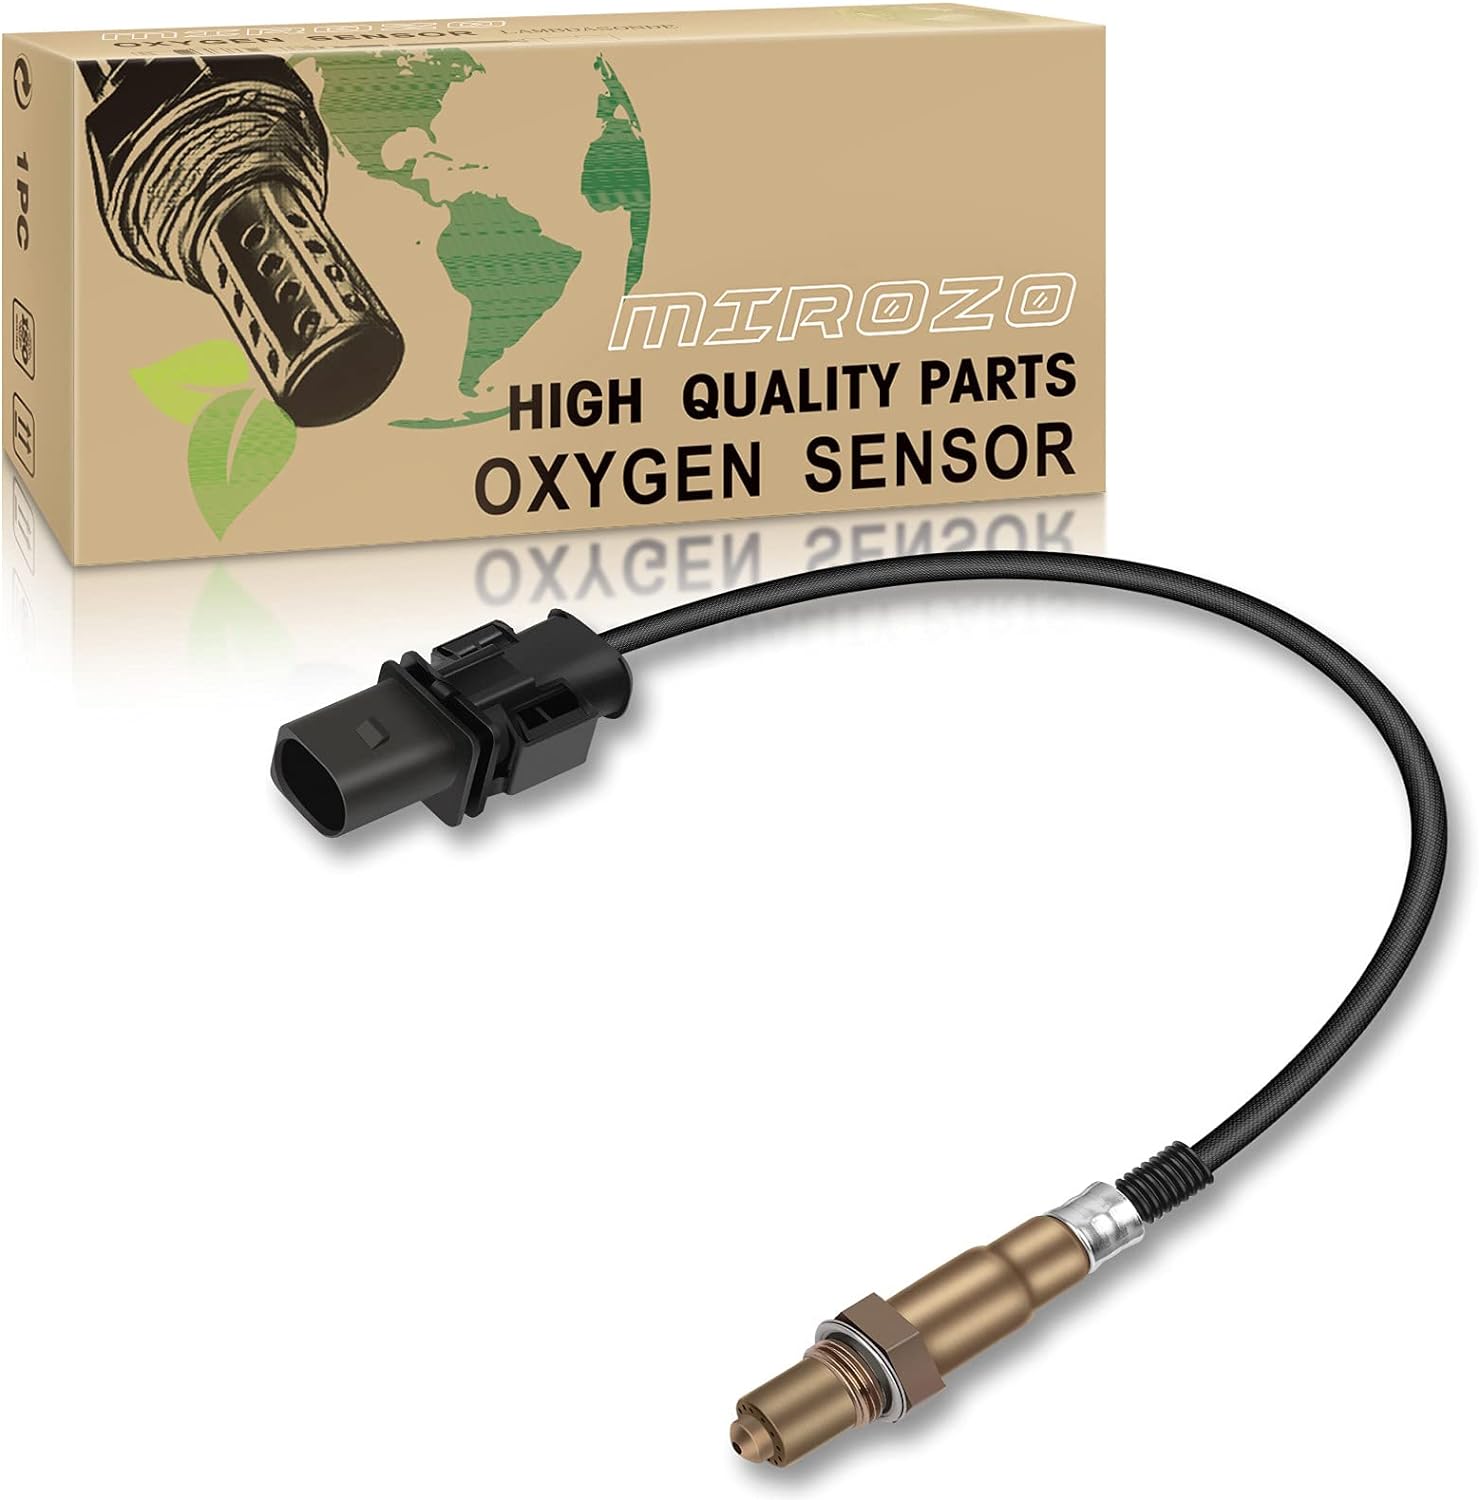 payment-provider-for-oxygen-sensors-in-india